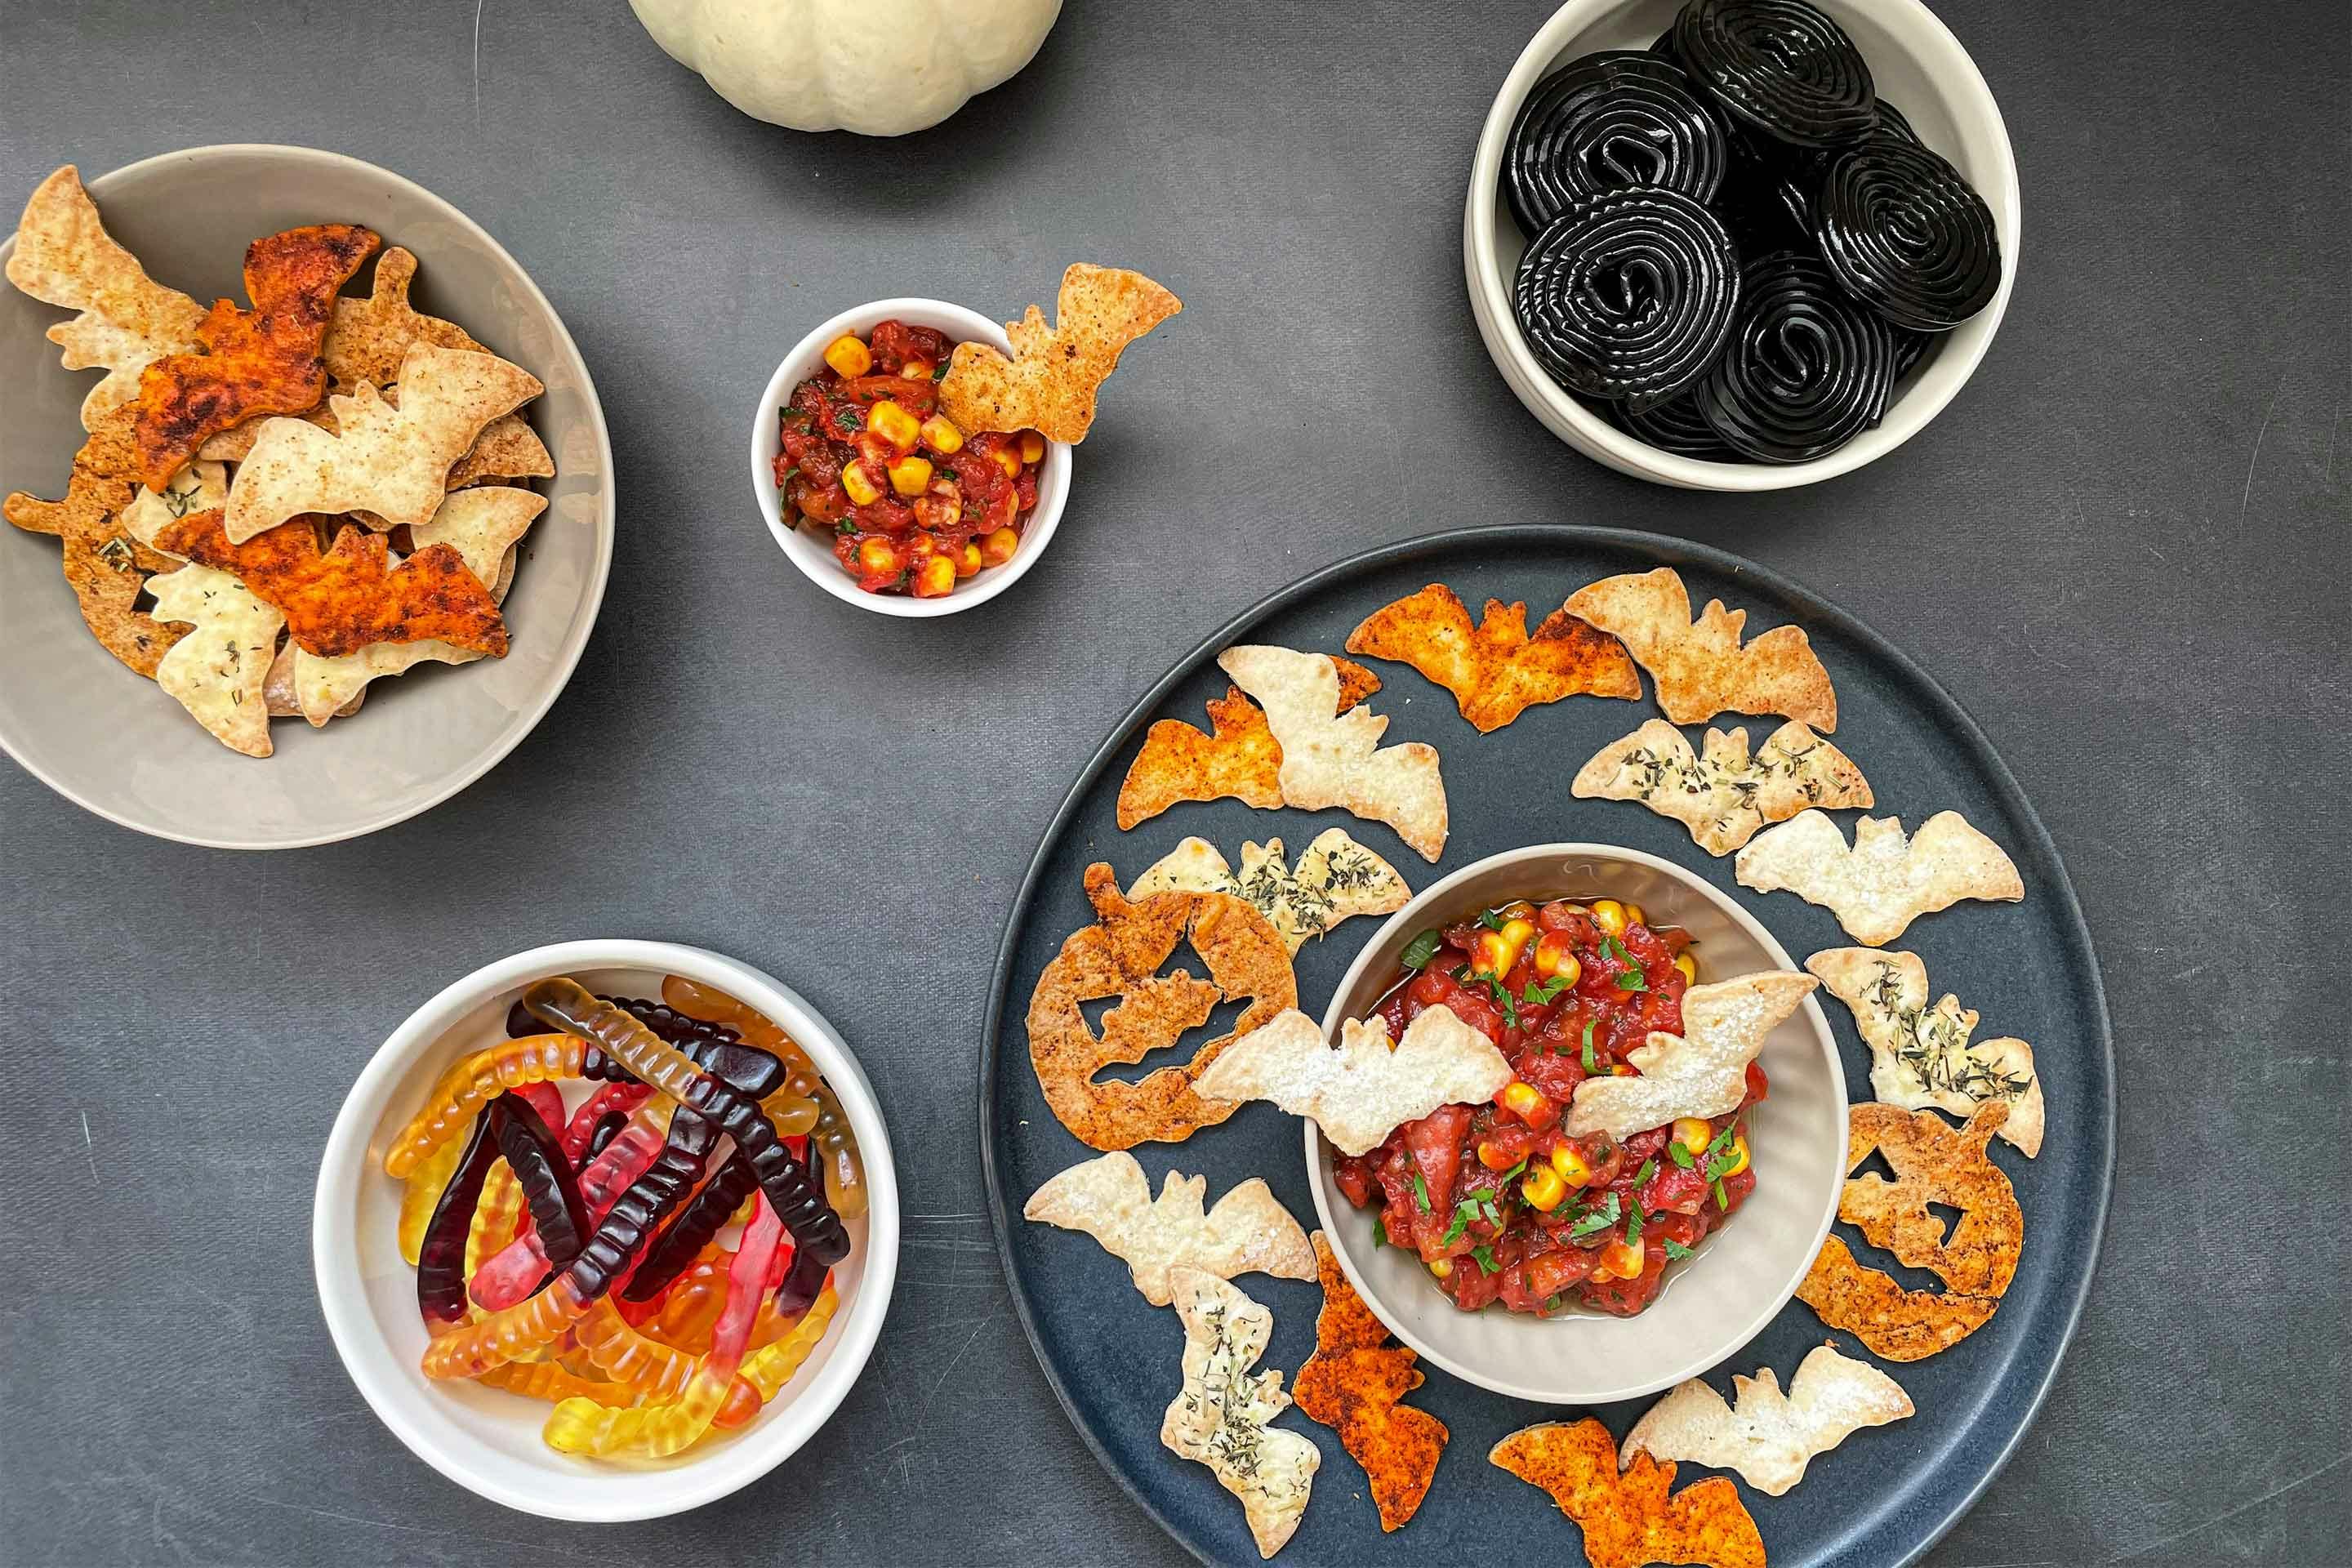 Spicy Halloween chips with red tomato dip and two bowls of candy.